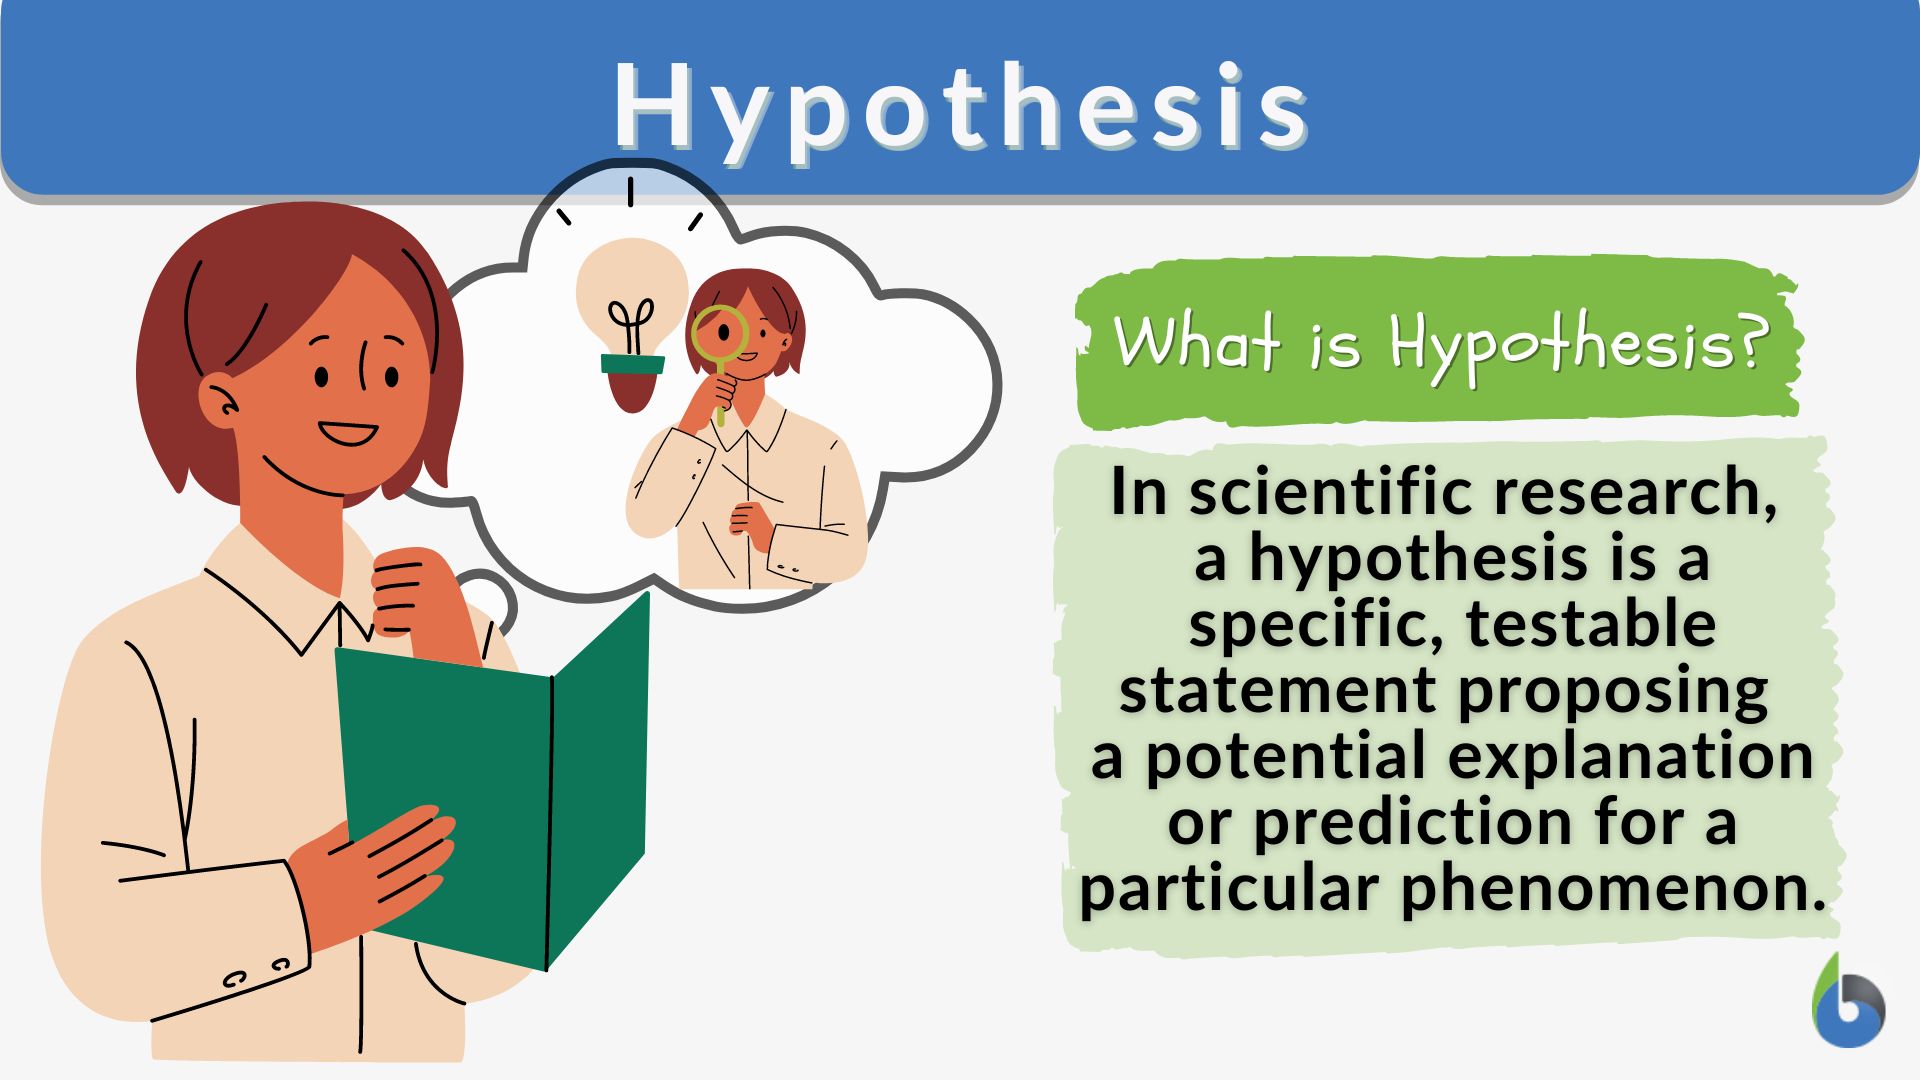 what's the purpose of forming a scientific hypothesis